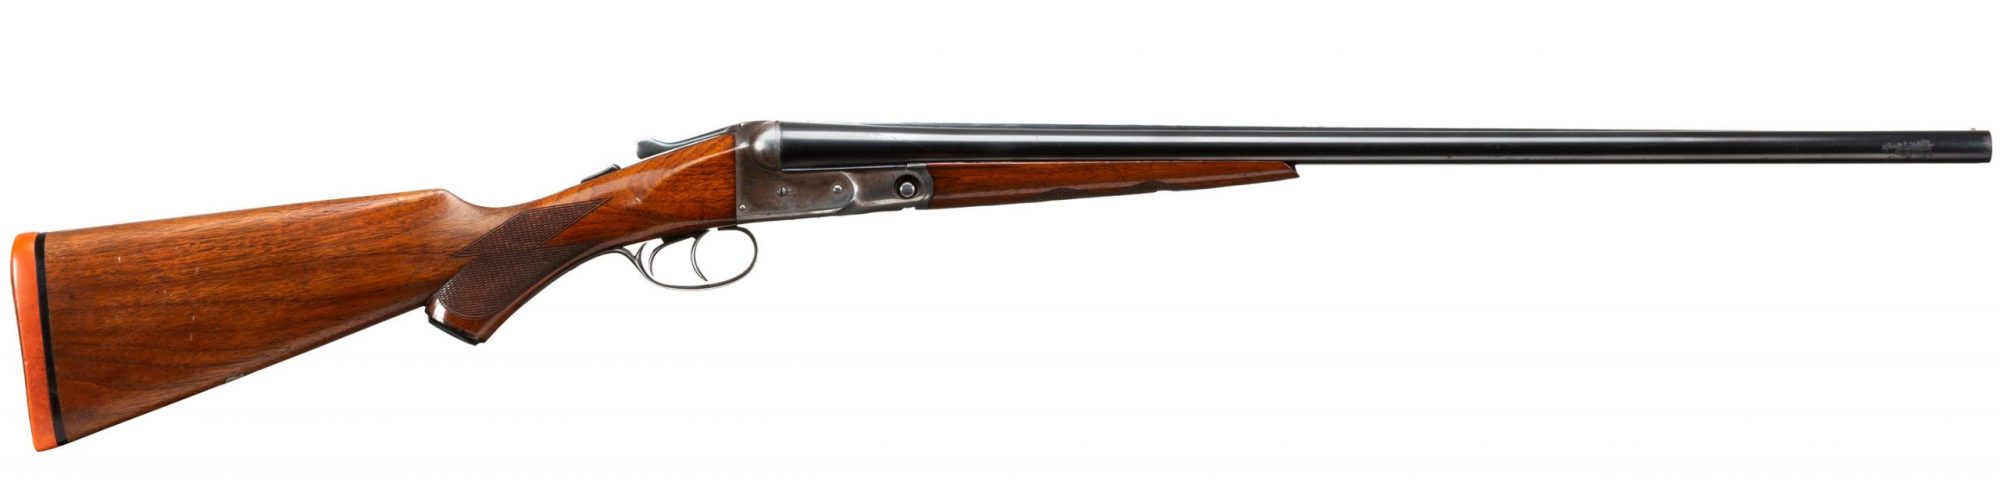 Photo of a pre-owned Parker VH 16 gauge side-by-side shotgun, available for sale as-is through Turnbull Restoration of Bloomfield, New York